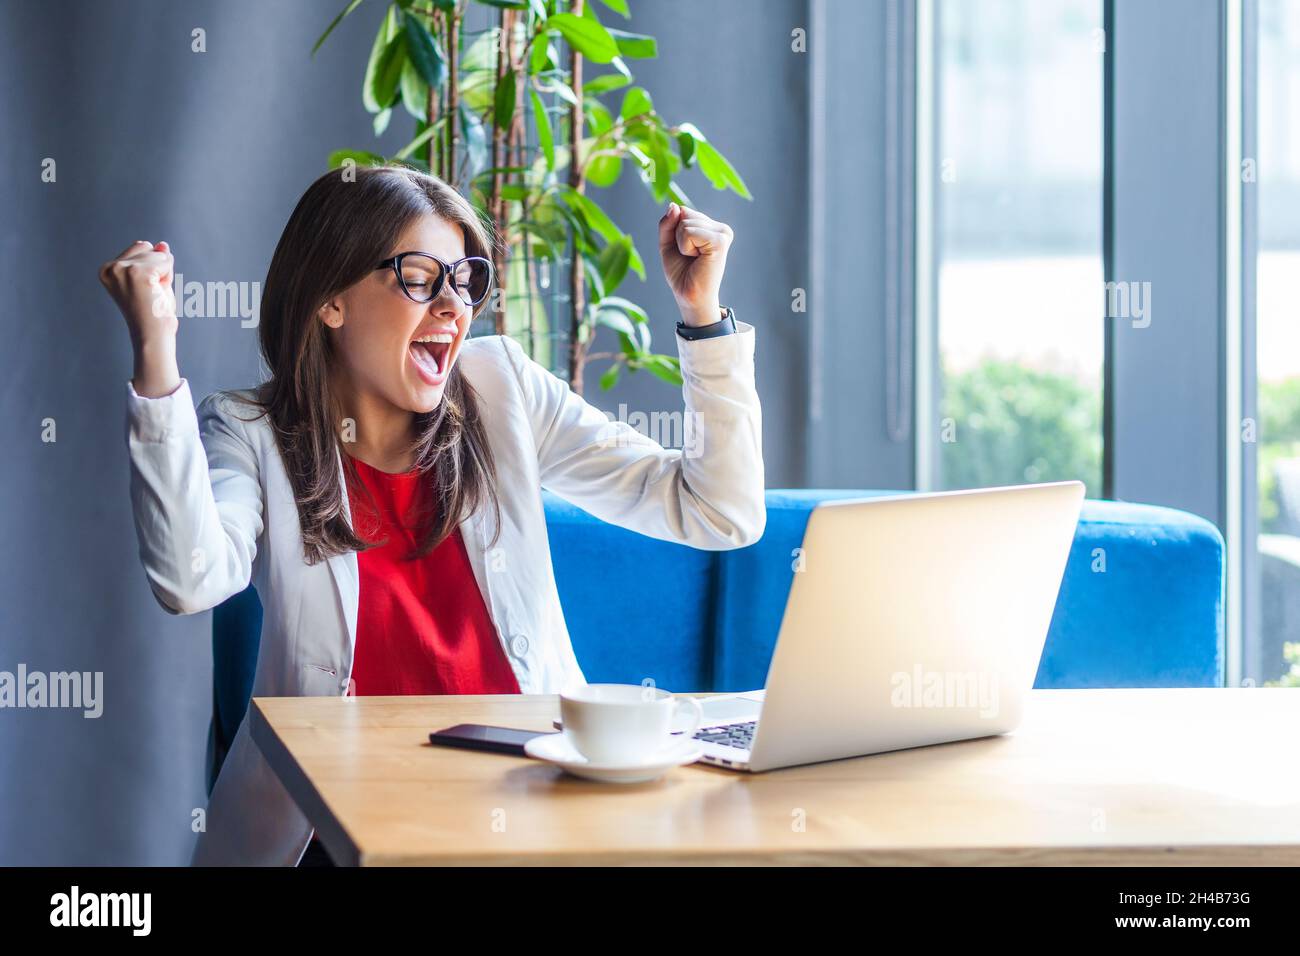 Extremely happy woman in glasses raising hands and screaming for joy, celebrating successful business online, rejoicing victory while working on laptop. Indoor shot, cafe or office background. Stock Photo